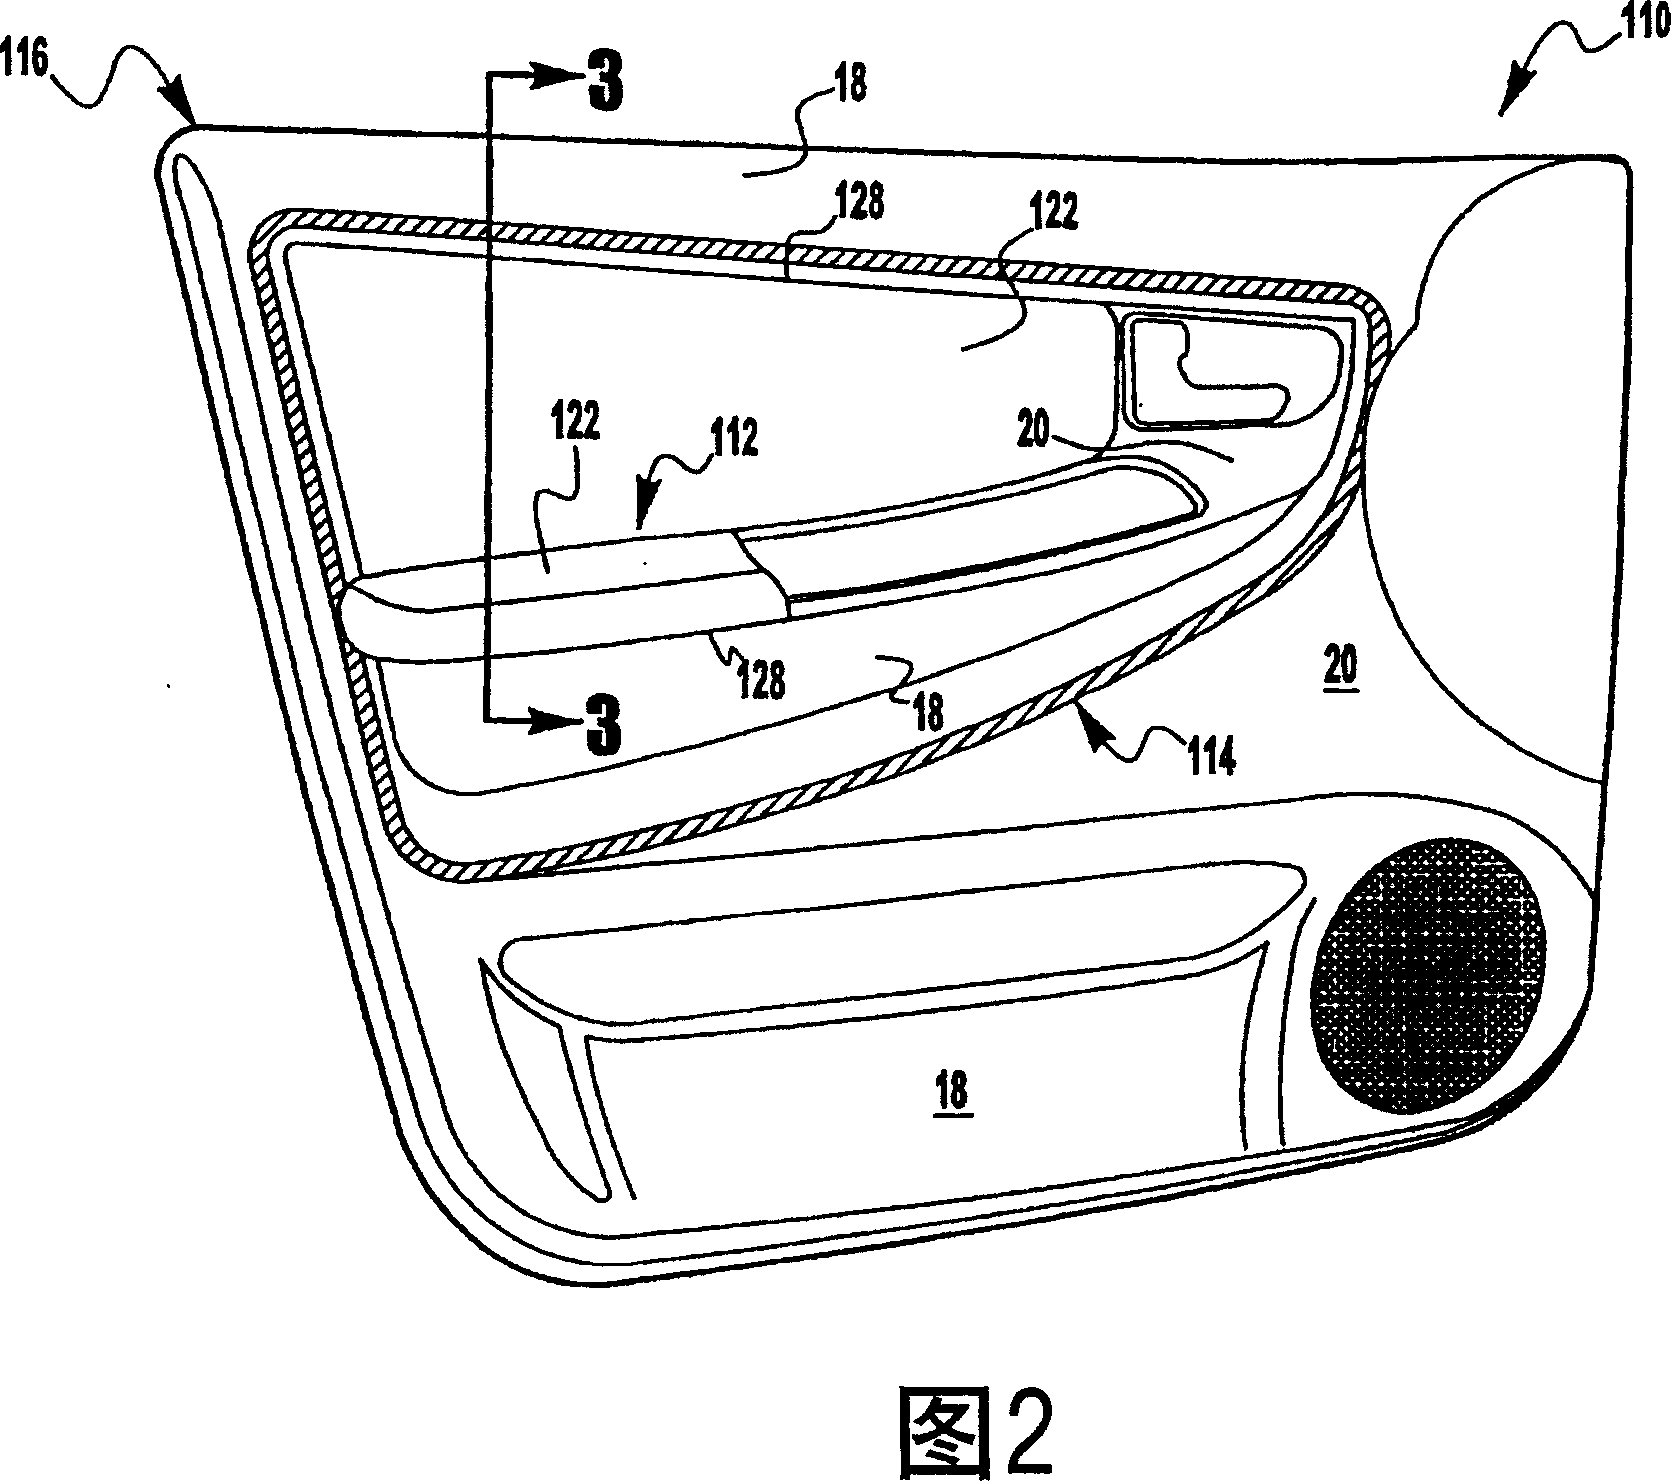 Vehicle component and method for making a vehicle component